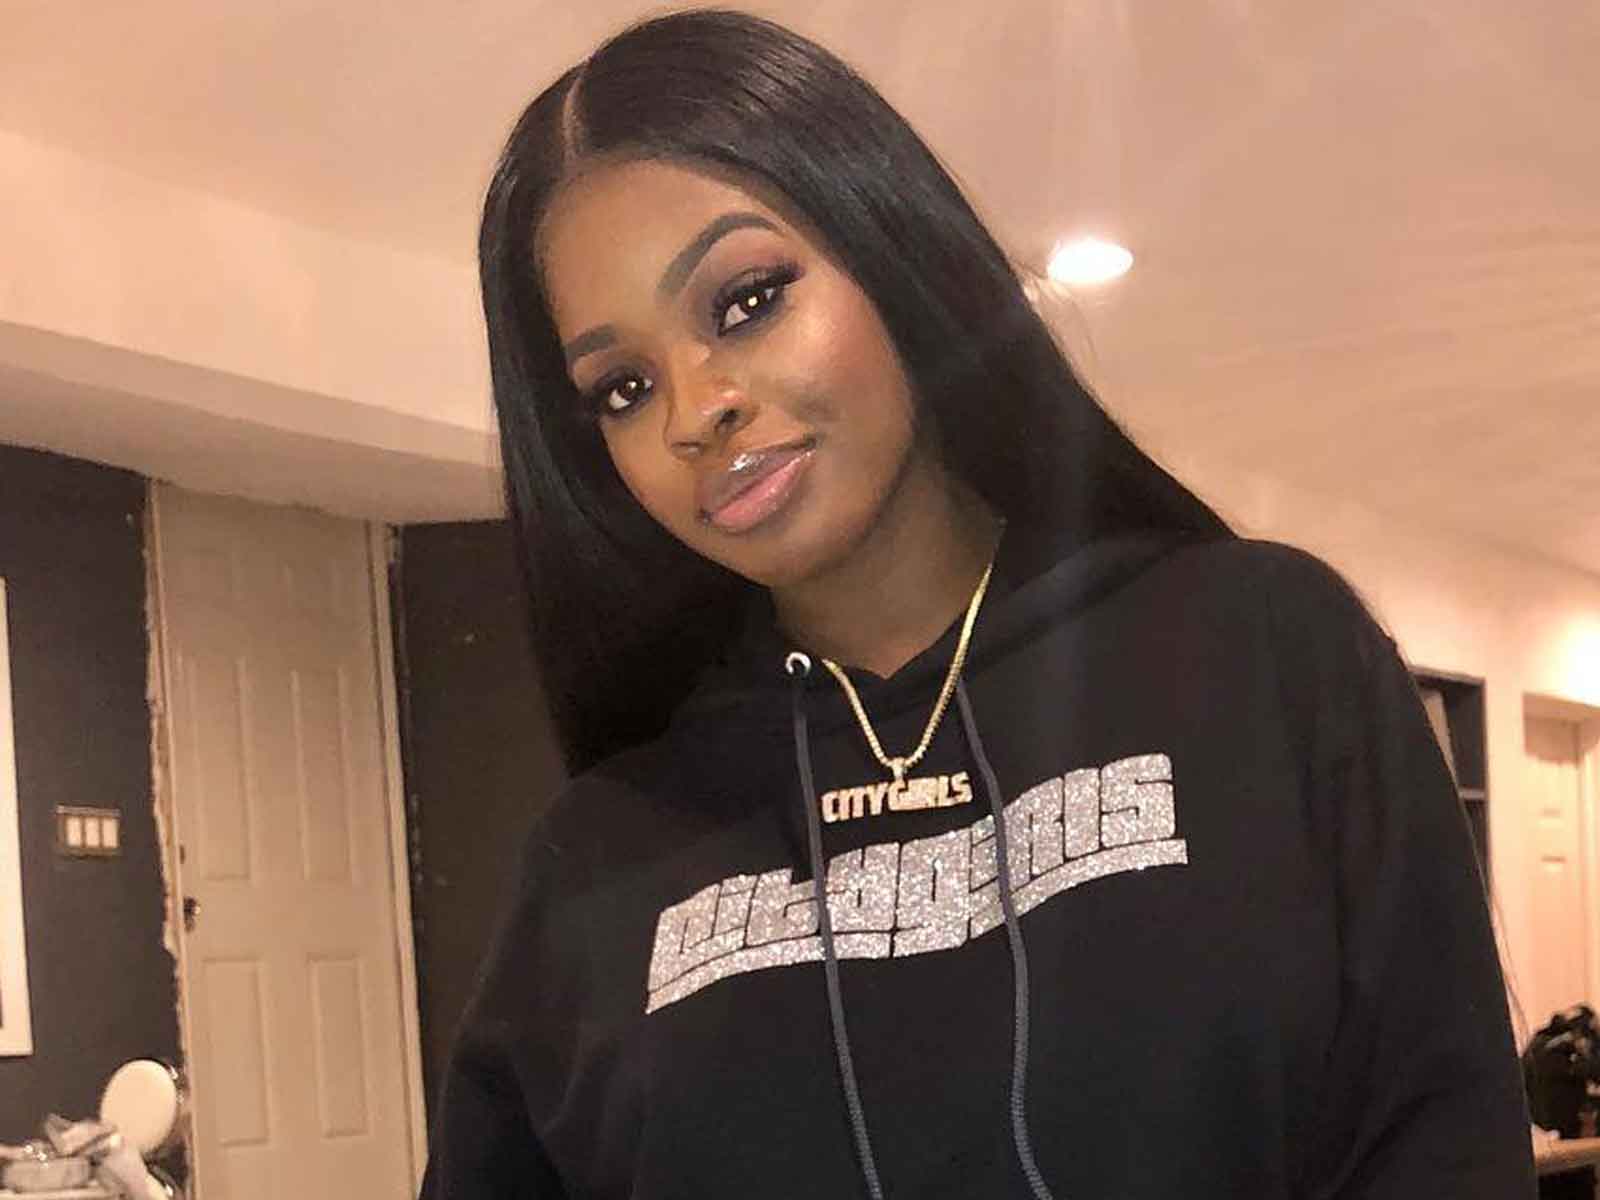 Name Dropping Drake Helps City Girls Rapper JT Delay Prison Check in